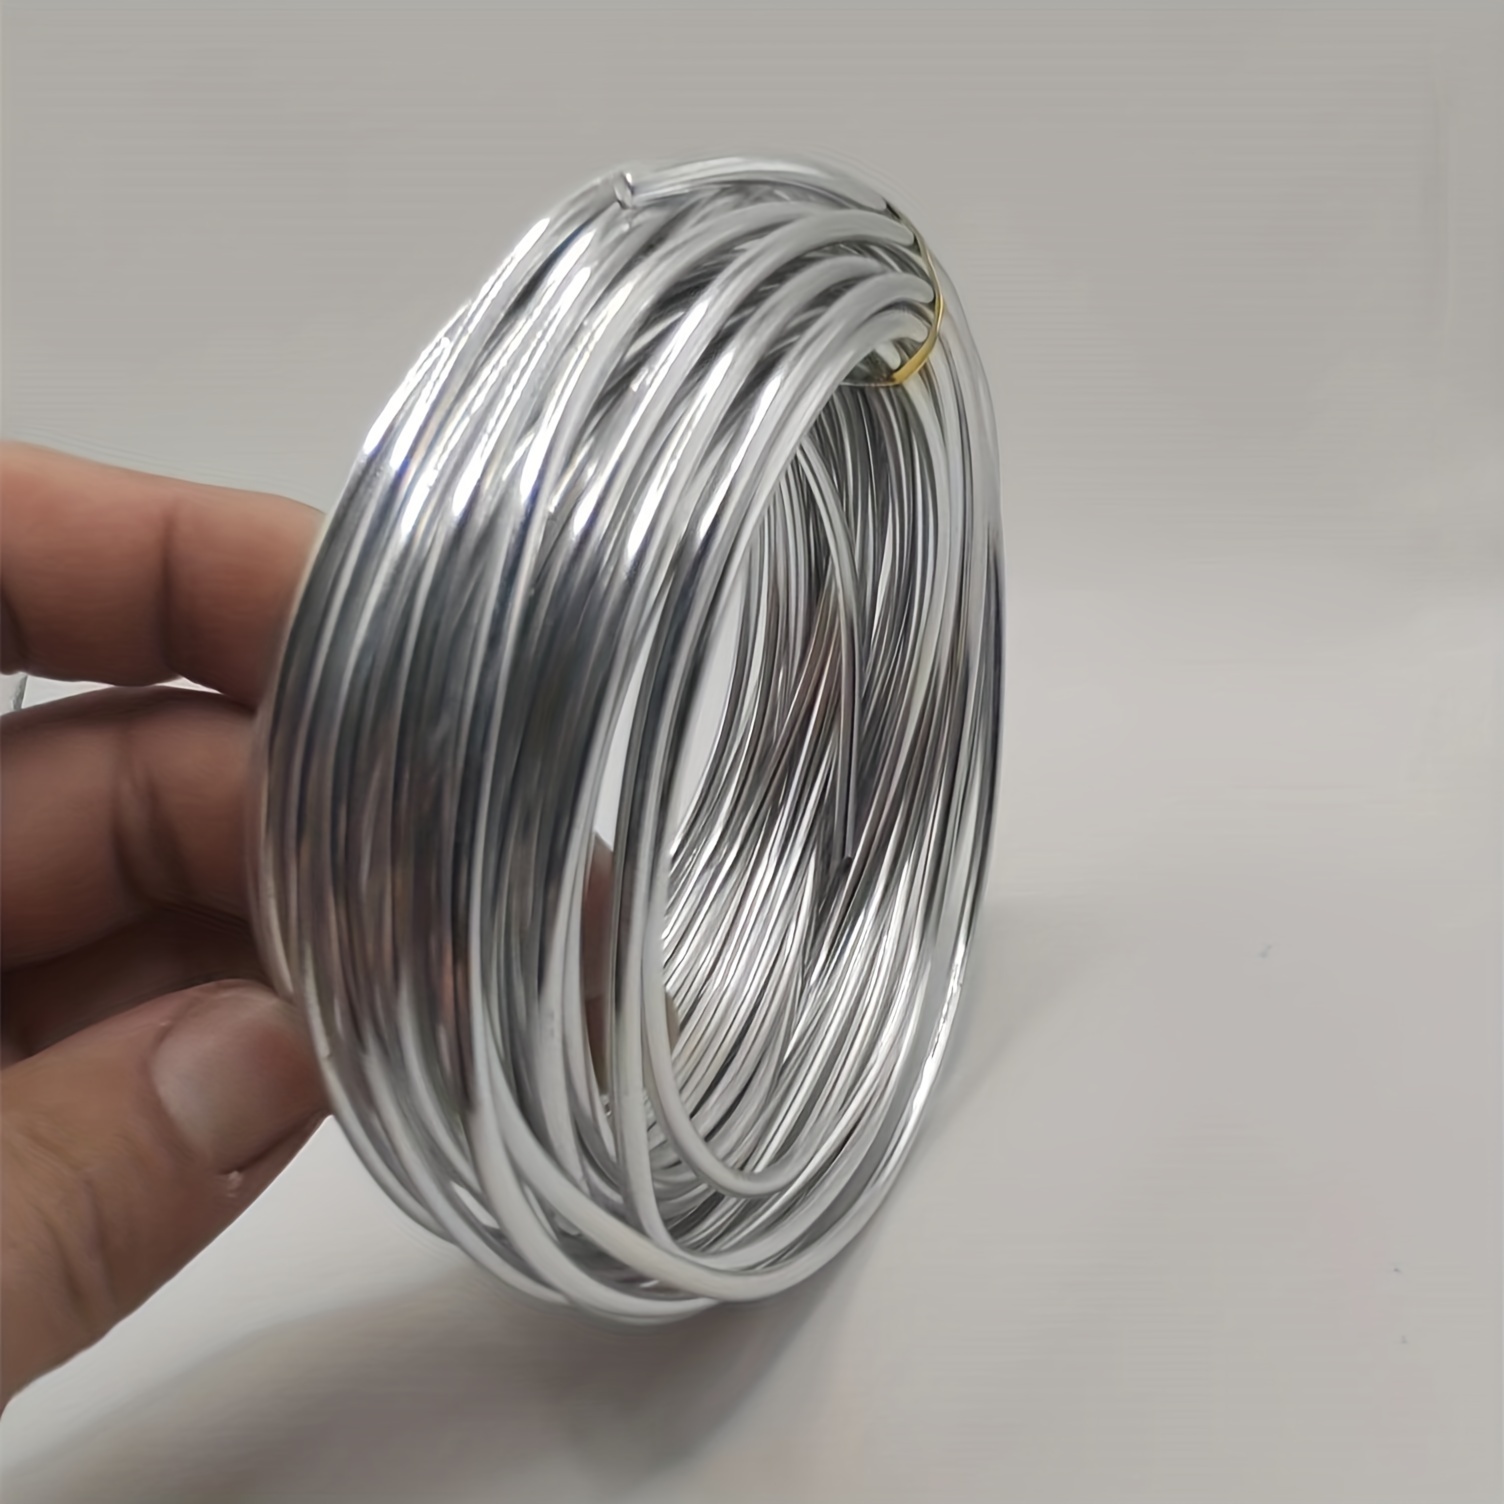  65.6 Feet Aluminum Craft Wire,15 Gauge Flexible Wire for  Jewelry Making and Crafts Artistic Floral Jewelry Beading Wire for DIY,  Doll Skeletons, 2 Rolls Silver and Golden(1.5 mm)